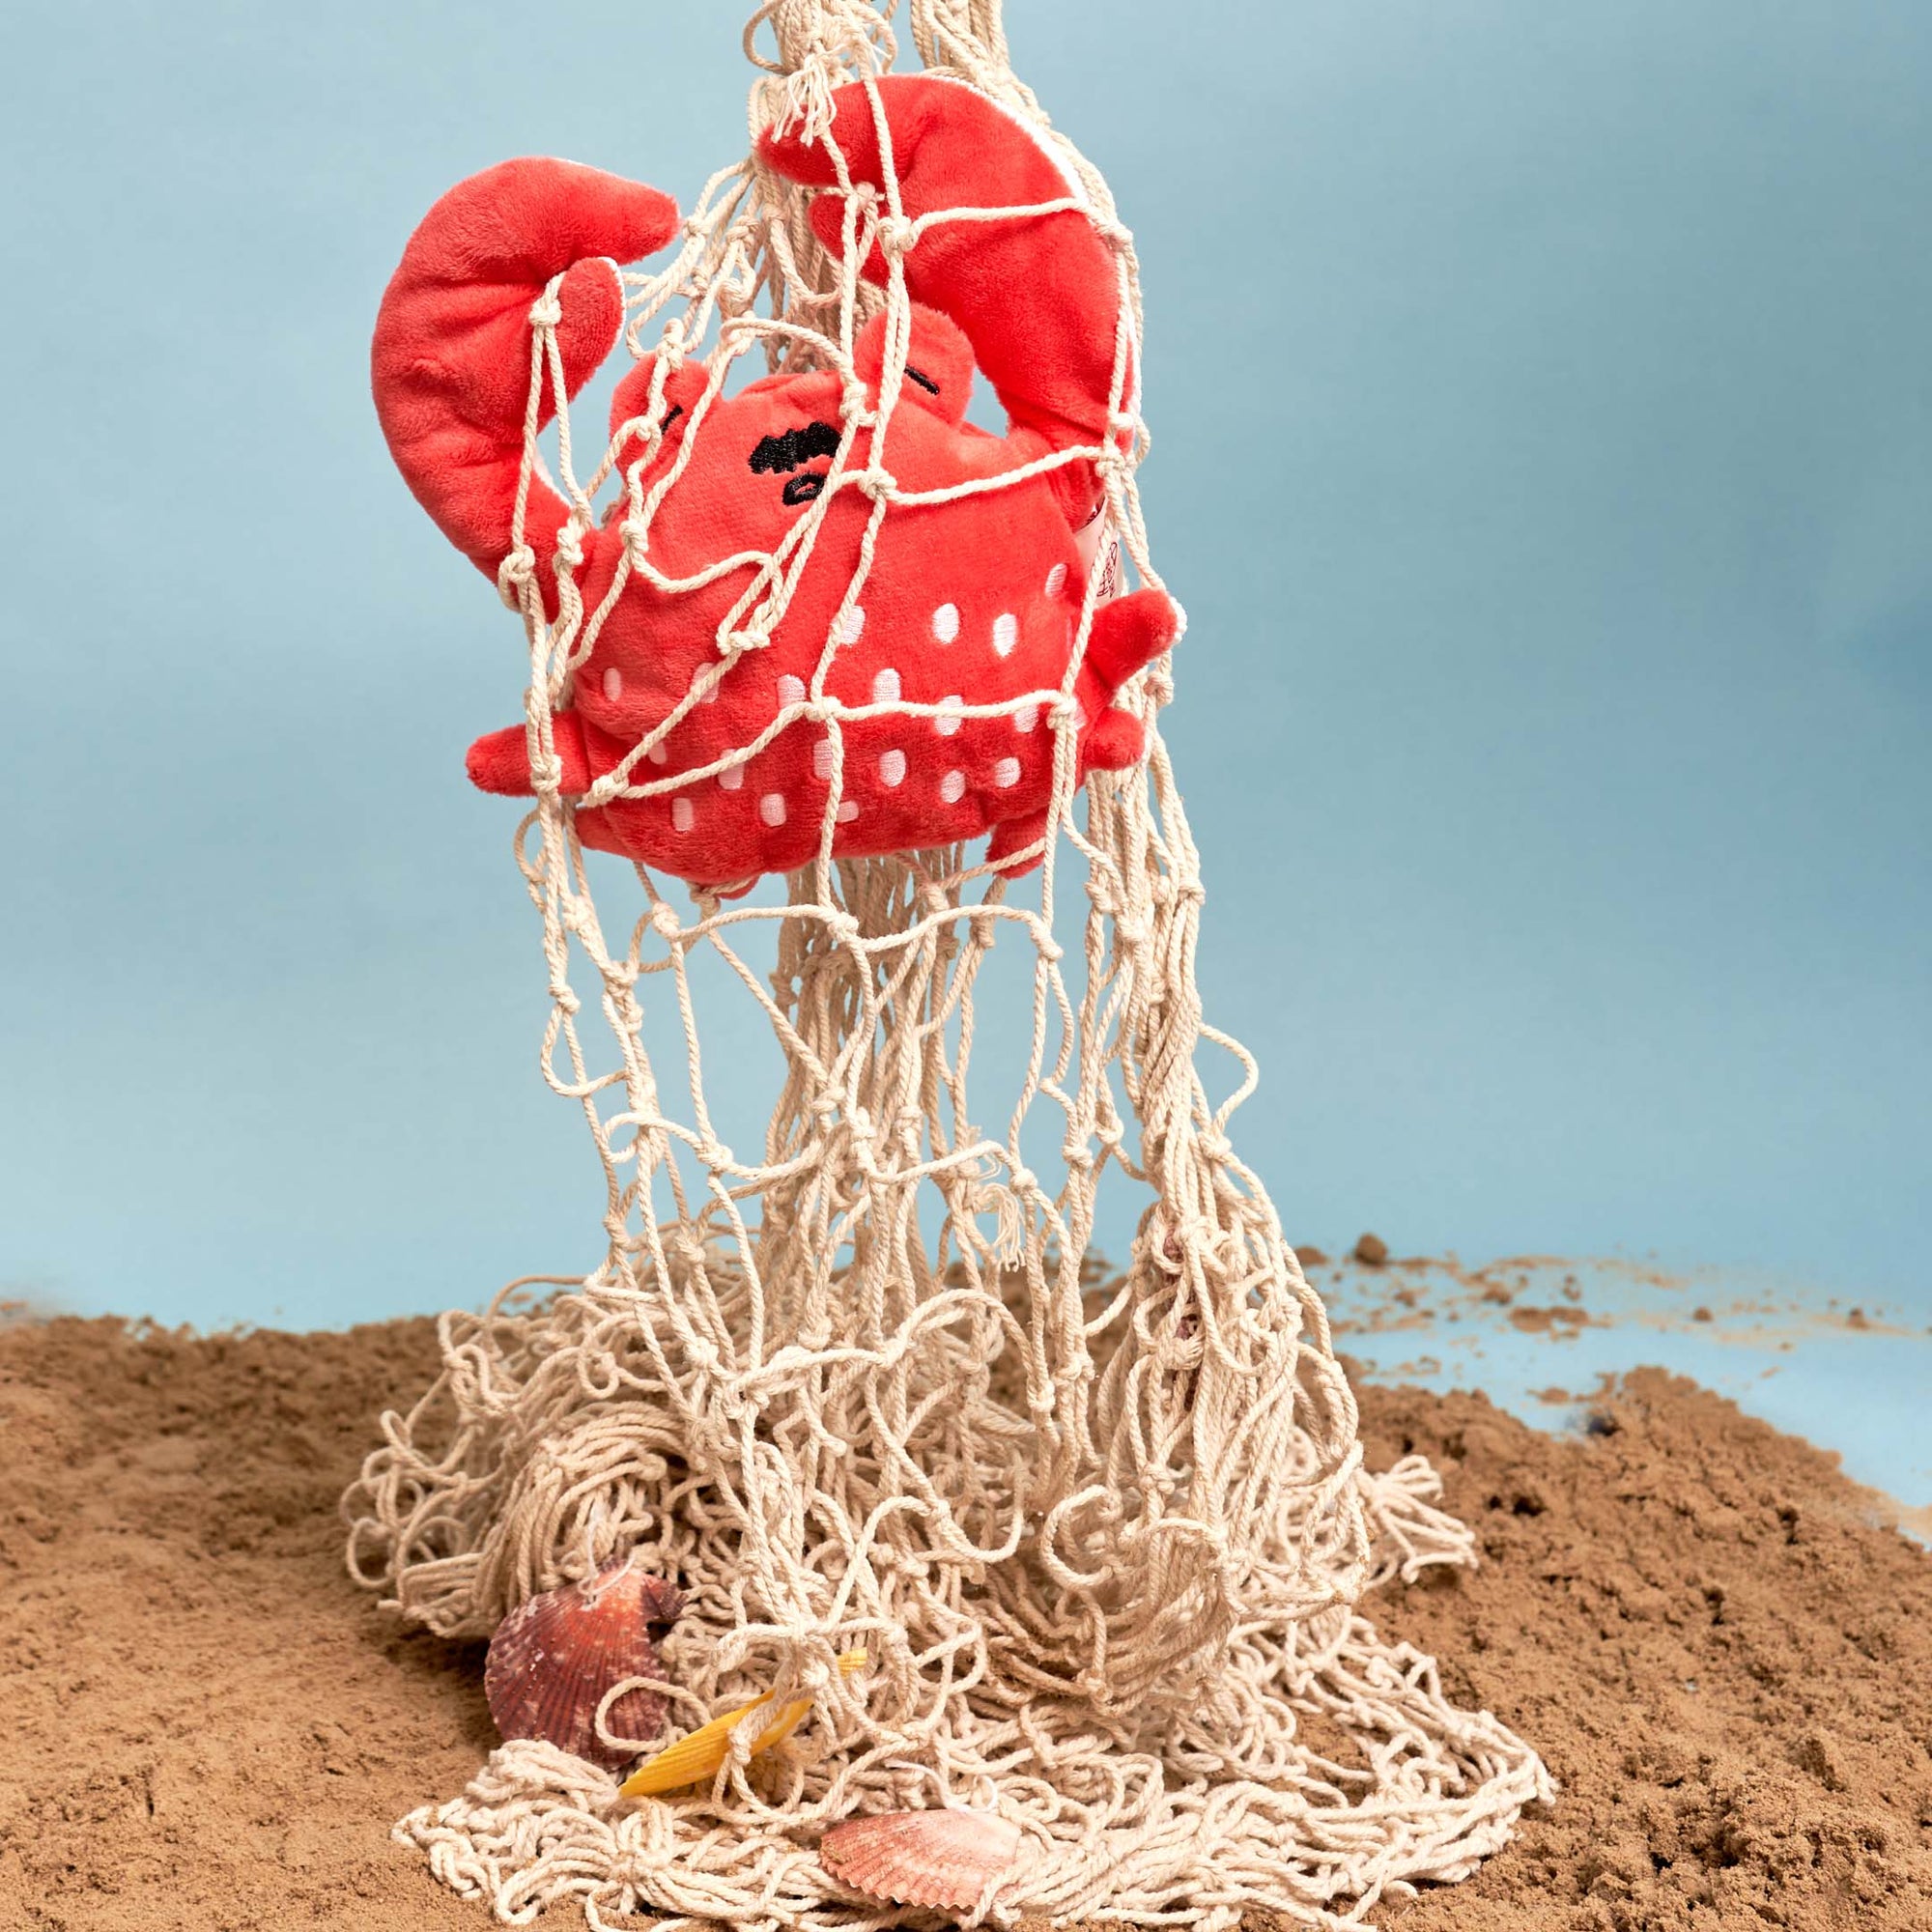 The image shows the plush red crab toy entangled in a fishing net, with a backdrop suggesting a sandy, beach-like environment. There are also shells and starfish partially buried in the sand at the base of the net, adding to the maritime theme. This setting is possibly staged to evoke the natural habitat of a crab, creating a playful and thematic presentation of the toy, which might be used for promotional purposes or as a creative display.